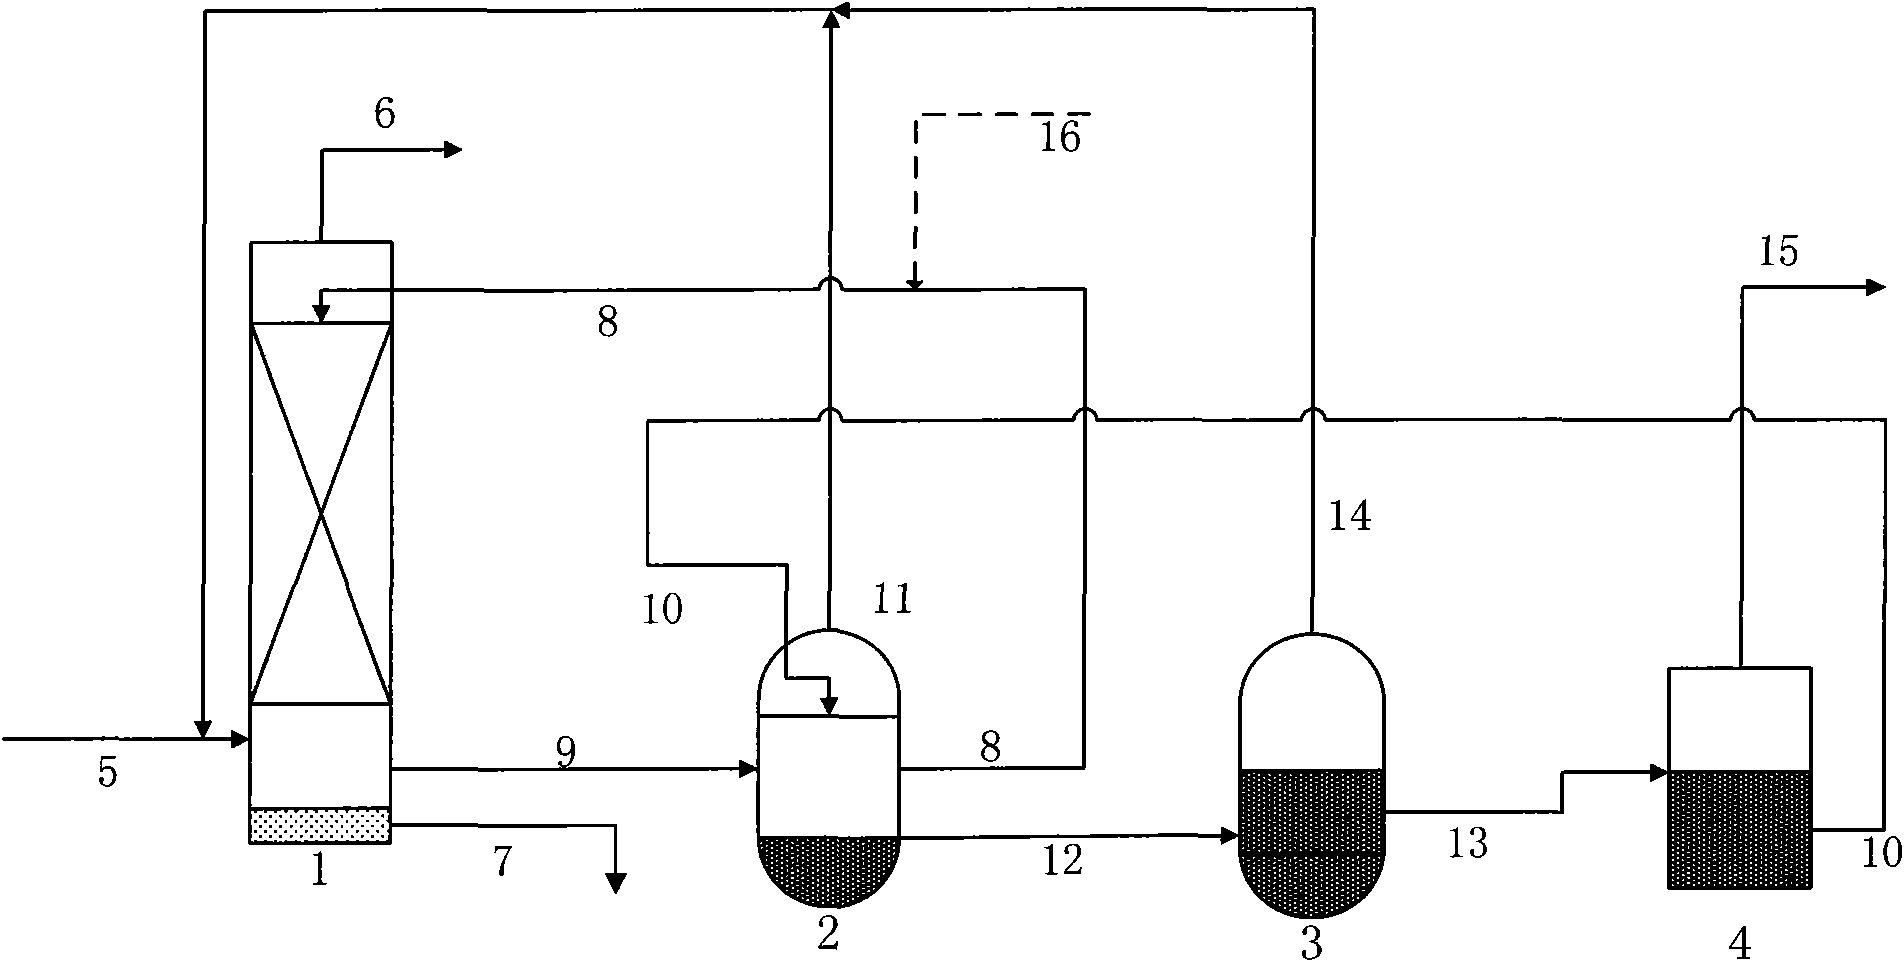 Process for desulphurizing flue gas and producing sulfur dioxide by sodium-zinc method